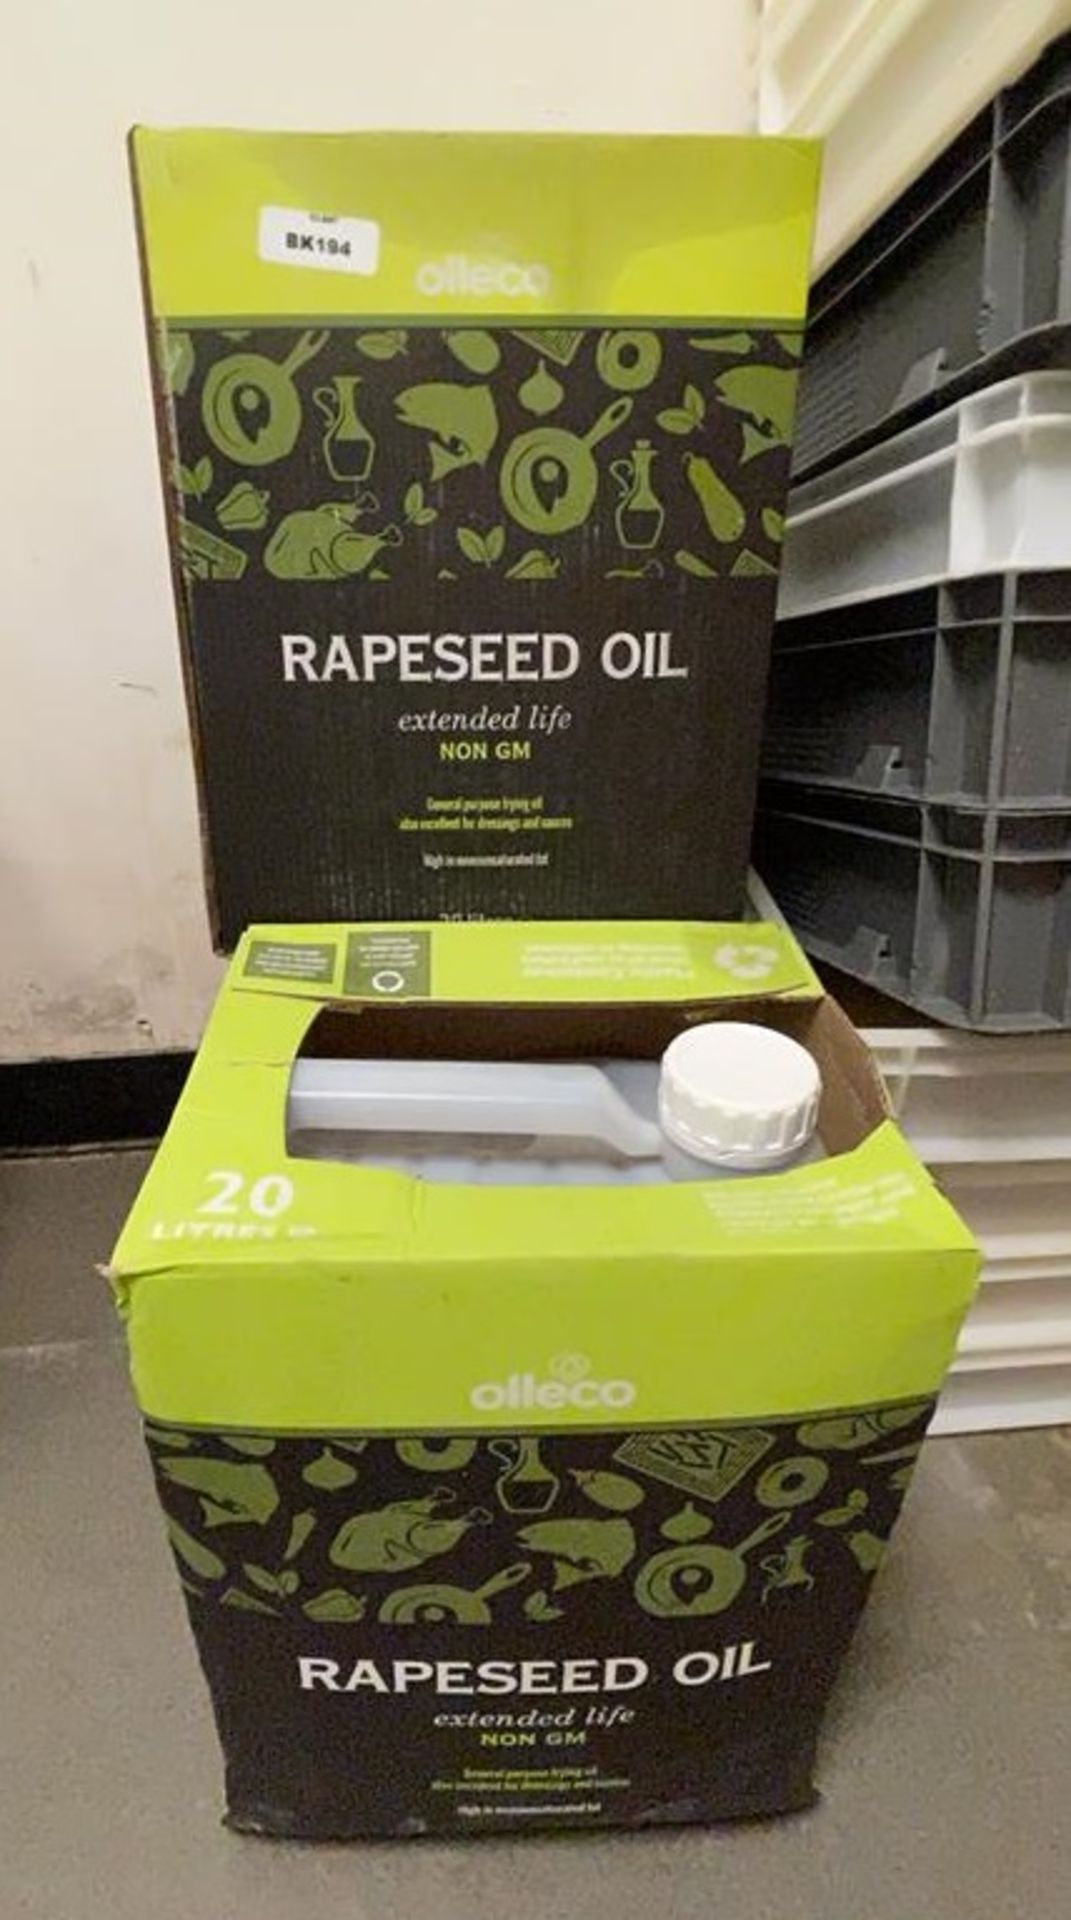 3 x 20 Litre Tubs of Olleco Rapeseed Oil - Unused Boxed Stock - Ref: BK194 - CL686 - Location: